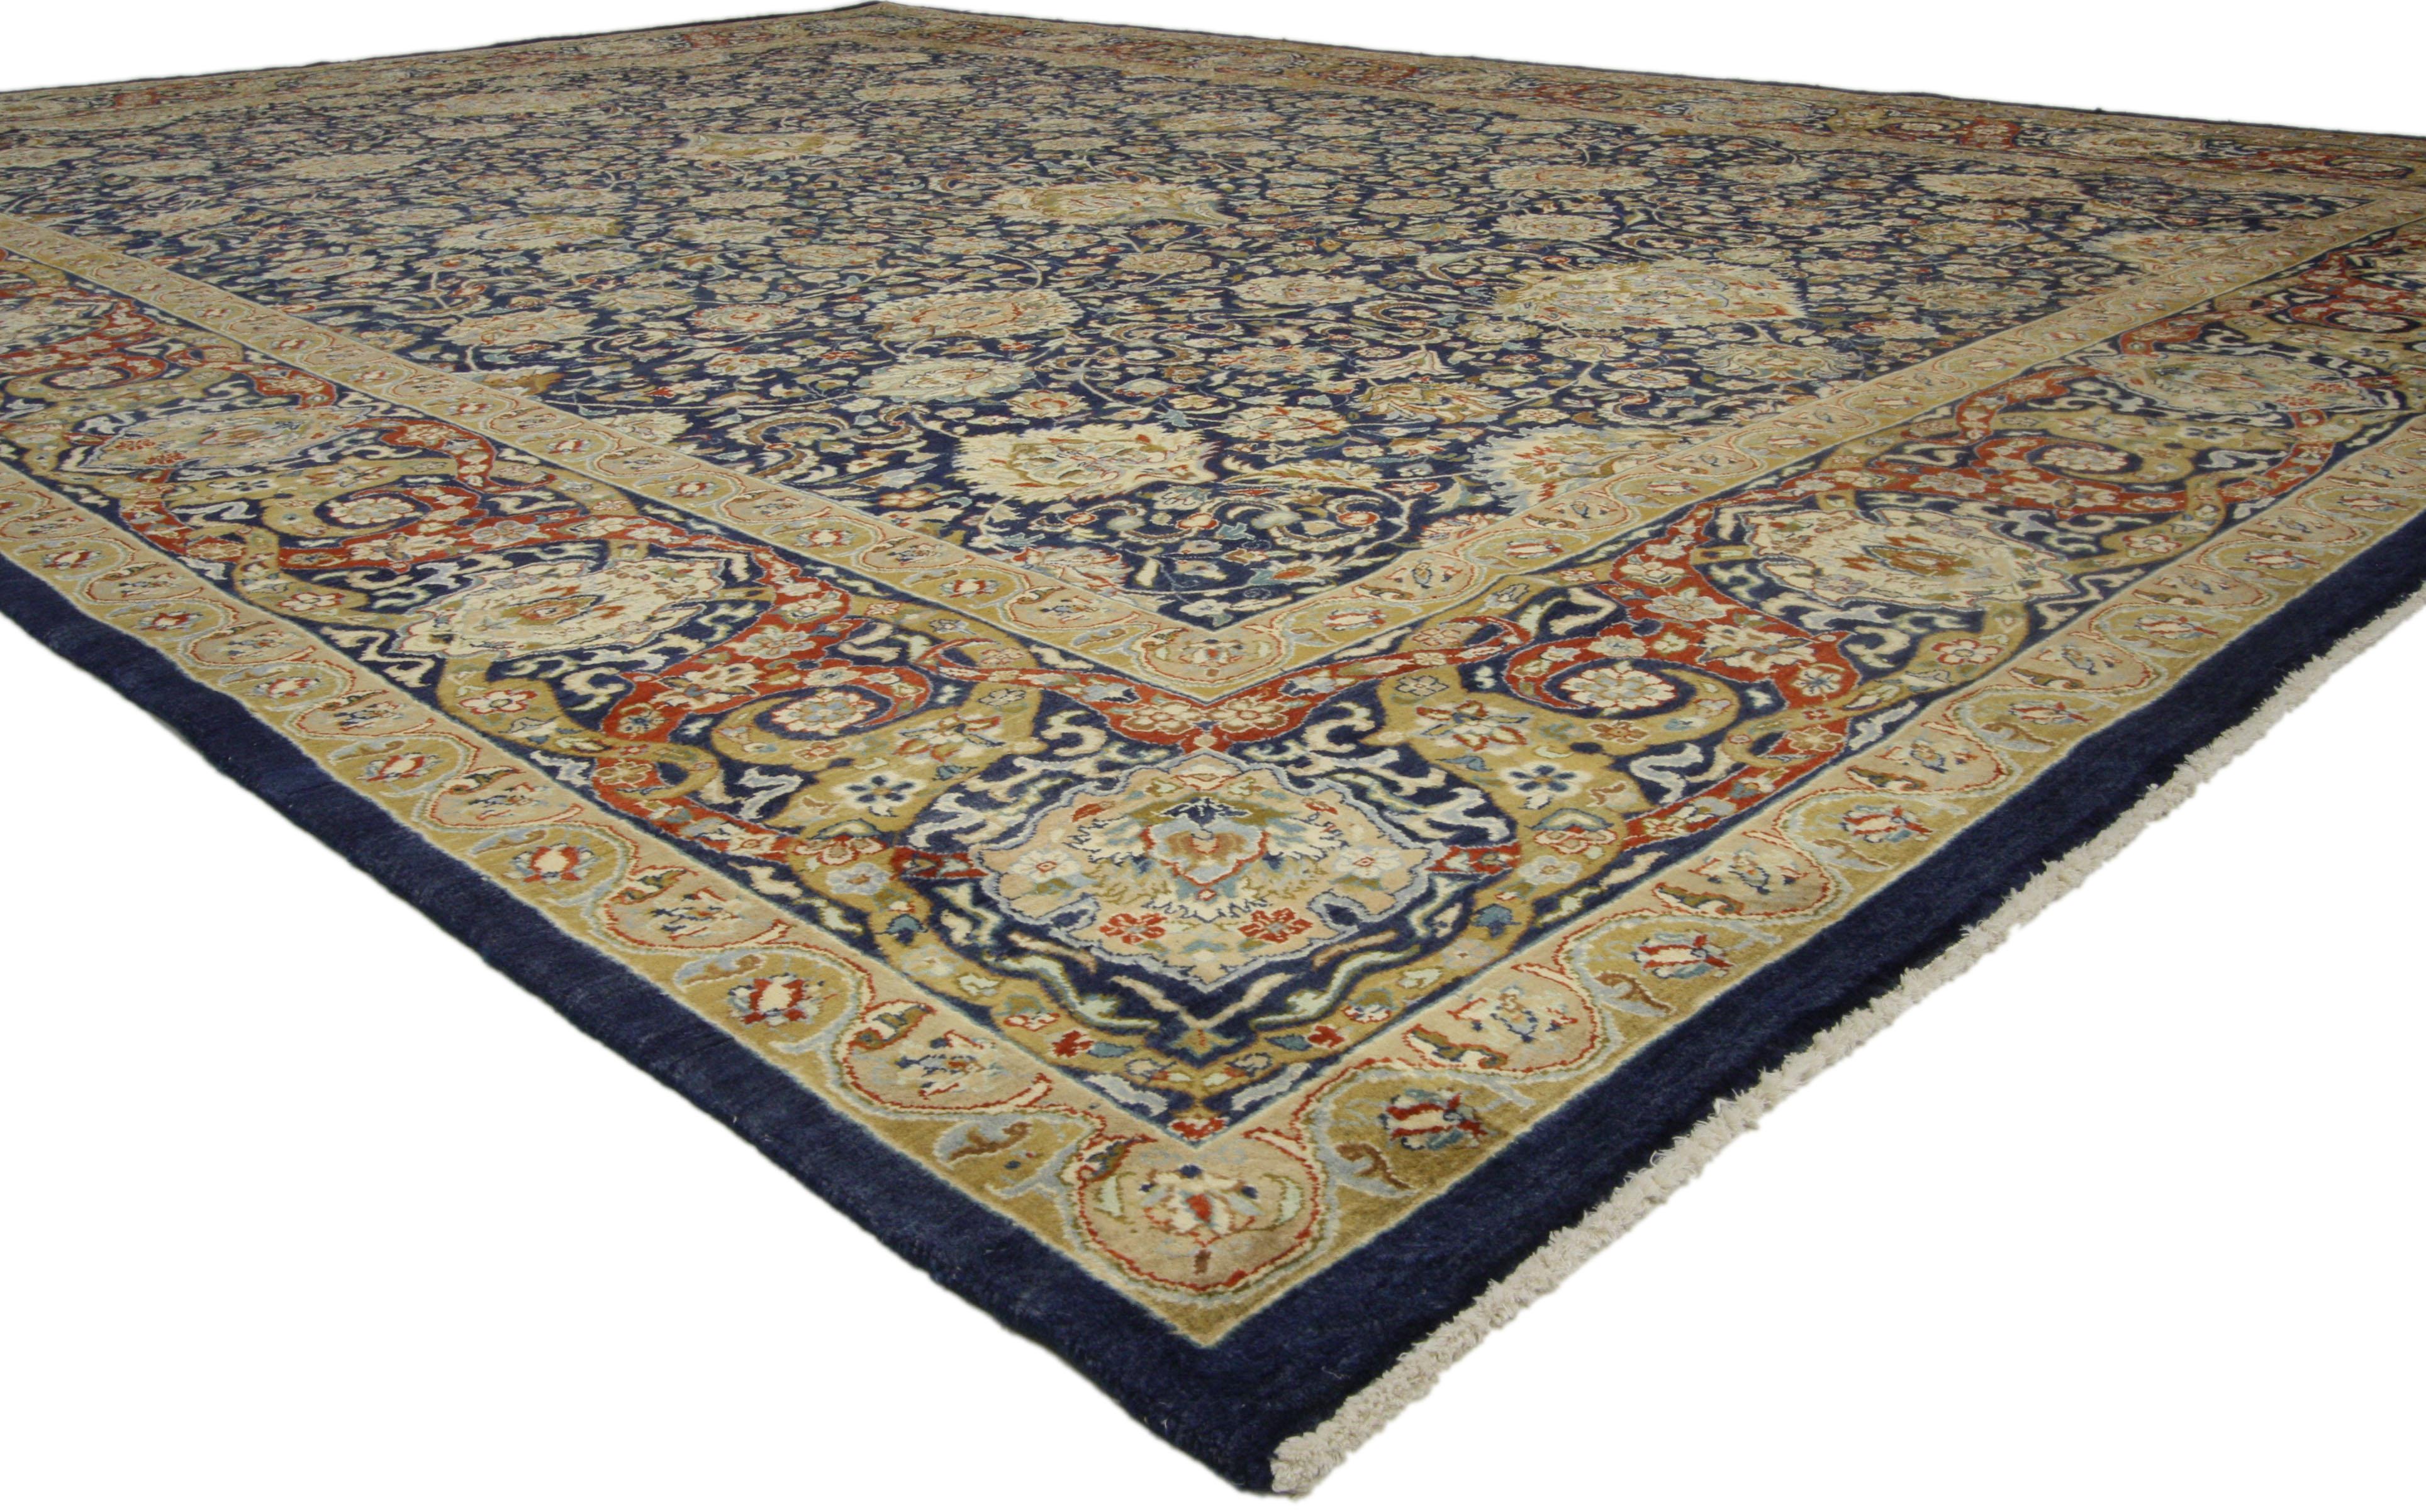 74746, vintage Persian design Pakistani Area rug with Medieval Renaissance style. With ornate details adding timeless elegance and a sense of history, this hand knotted wool vintage Persian Design Pakistani area rug features a refined all-over